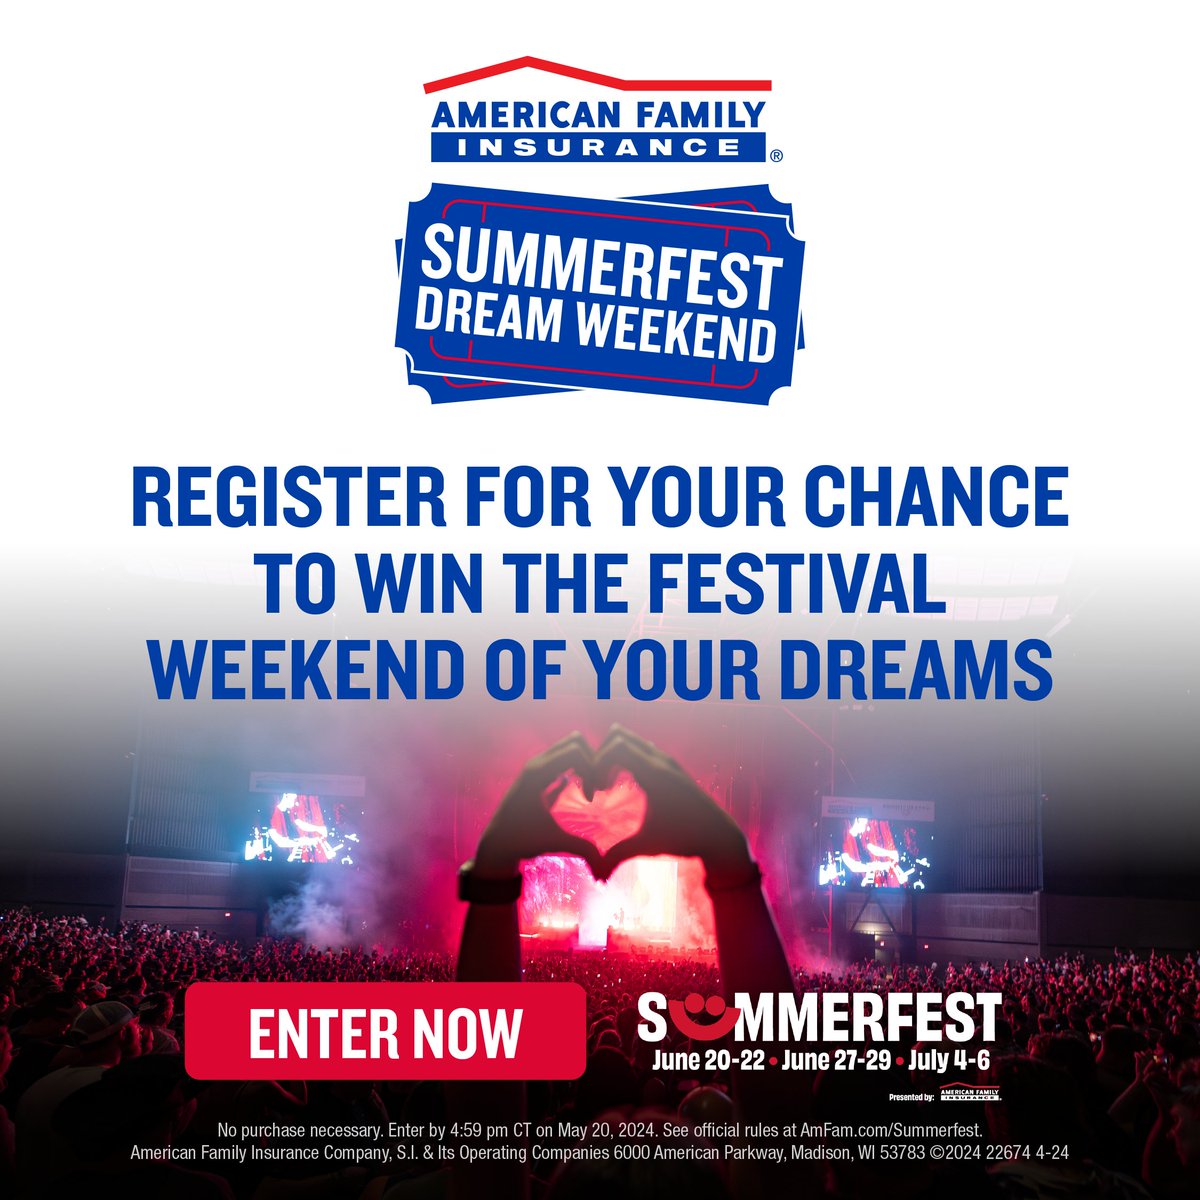 Live it up at Summerfest presented by @amfam! 🎉😎 Enter to win a chance at winning an epic VIP package for you and your bestie including tickets, travel, hotel accommodations, and more! 🙌 Enter to win: amfam.com/sponsorships/s… *Contest closes 5/20